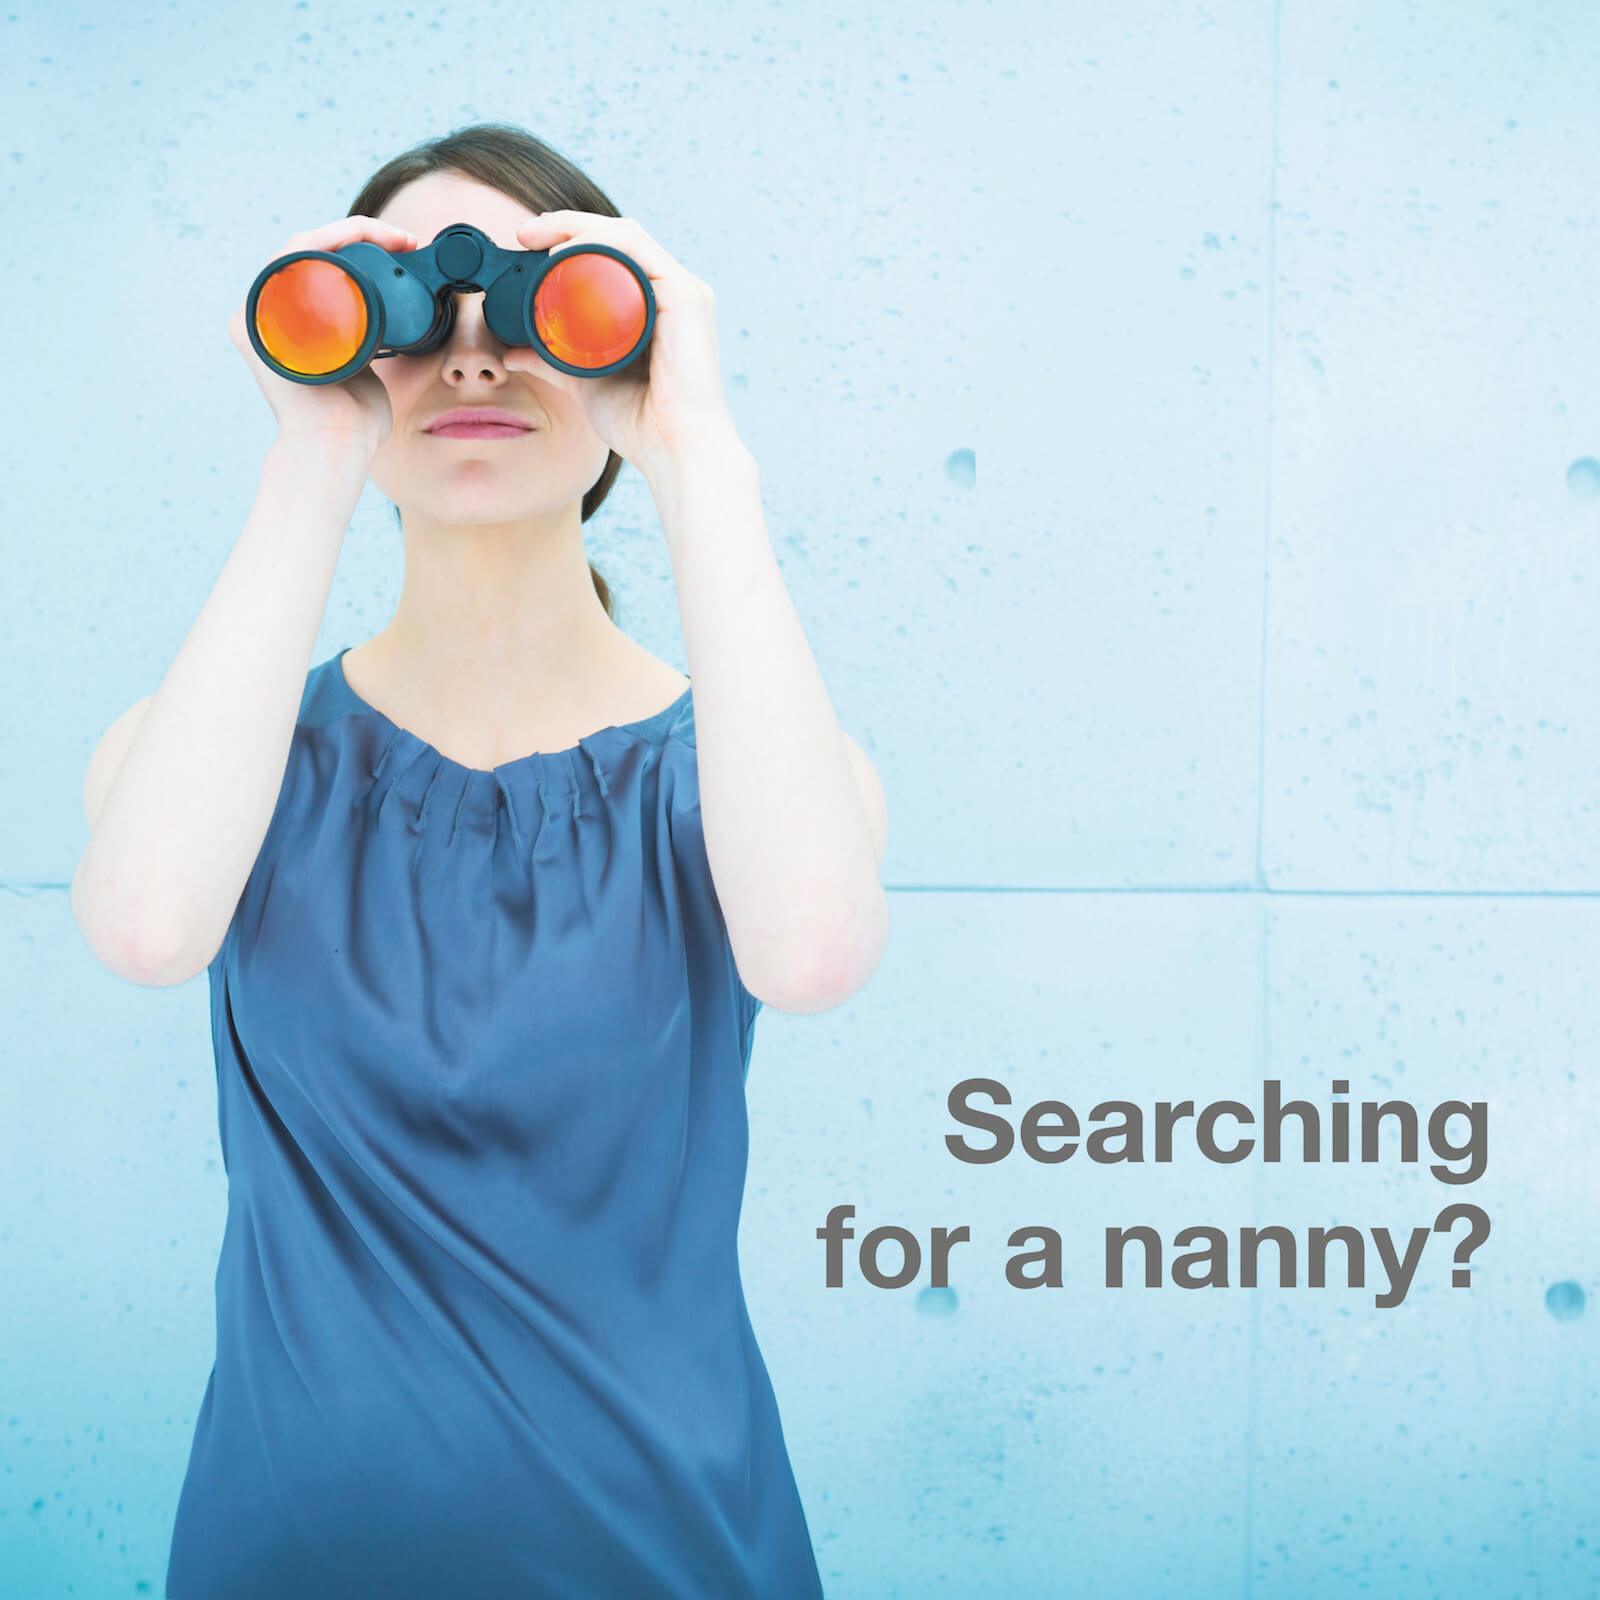 Looking for a private nanny, tutor, childcarer